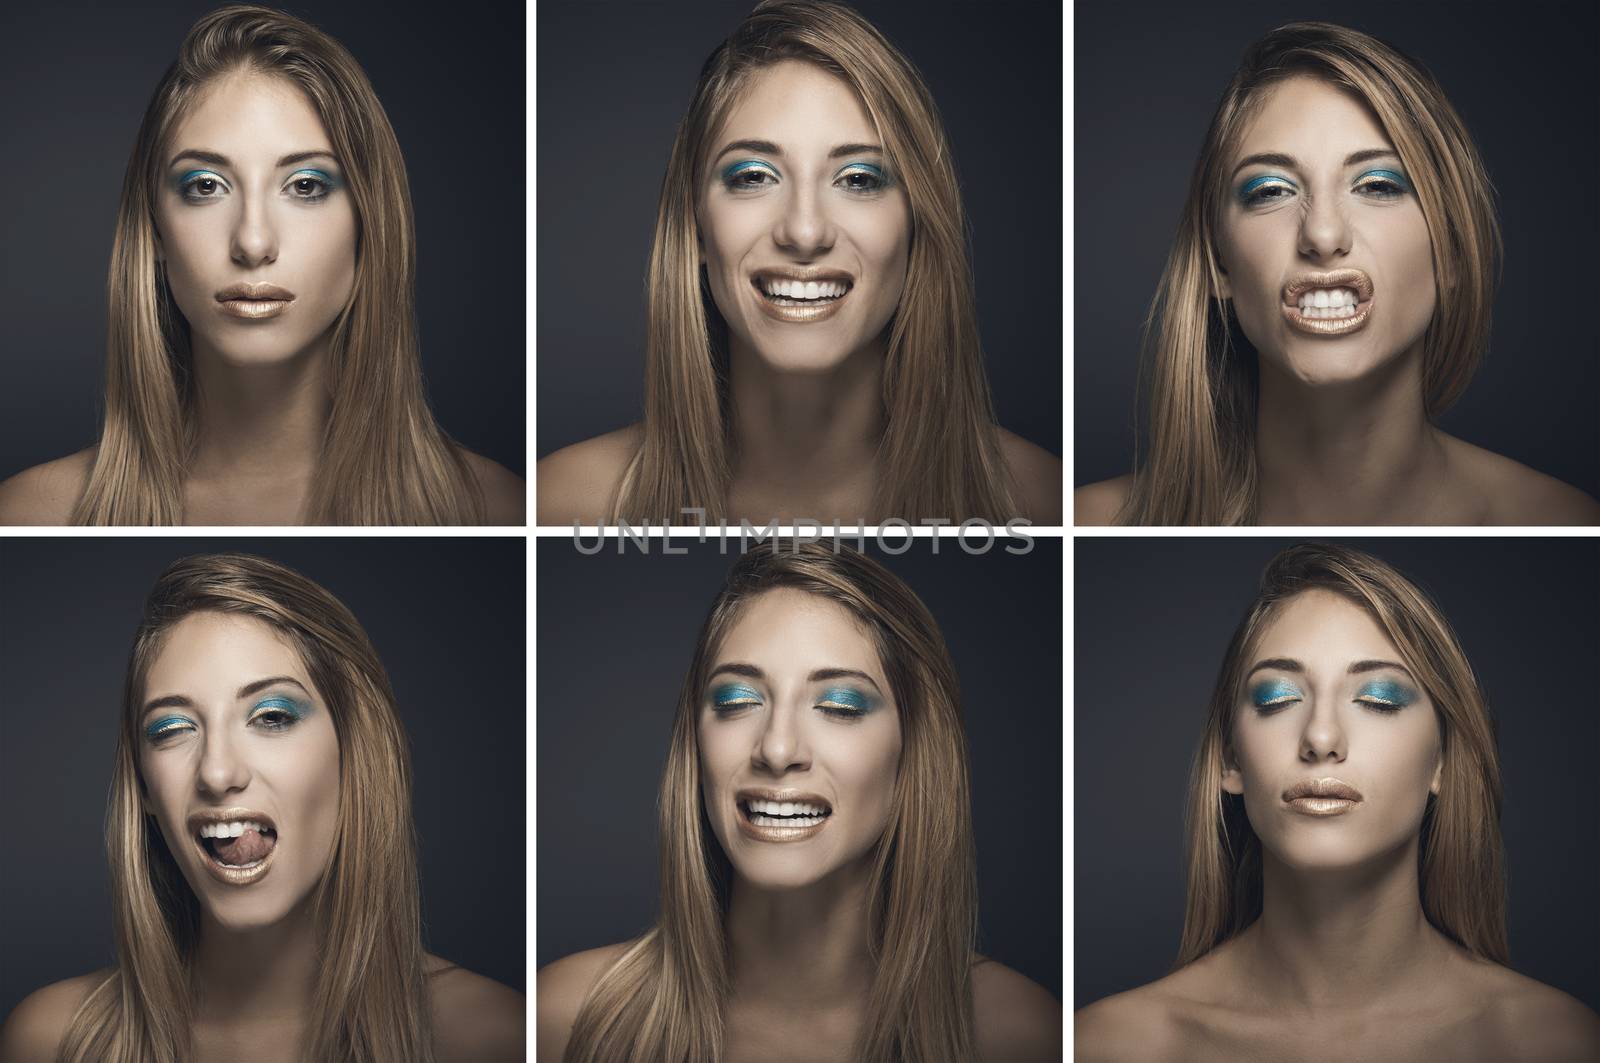 Six portraits of sexy young woman in different expressions by drmglc